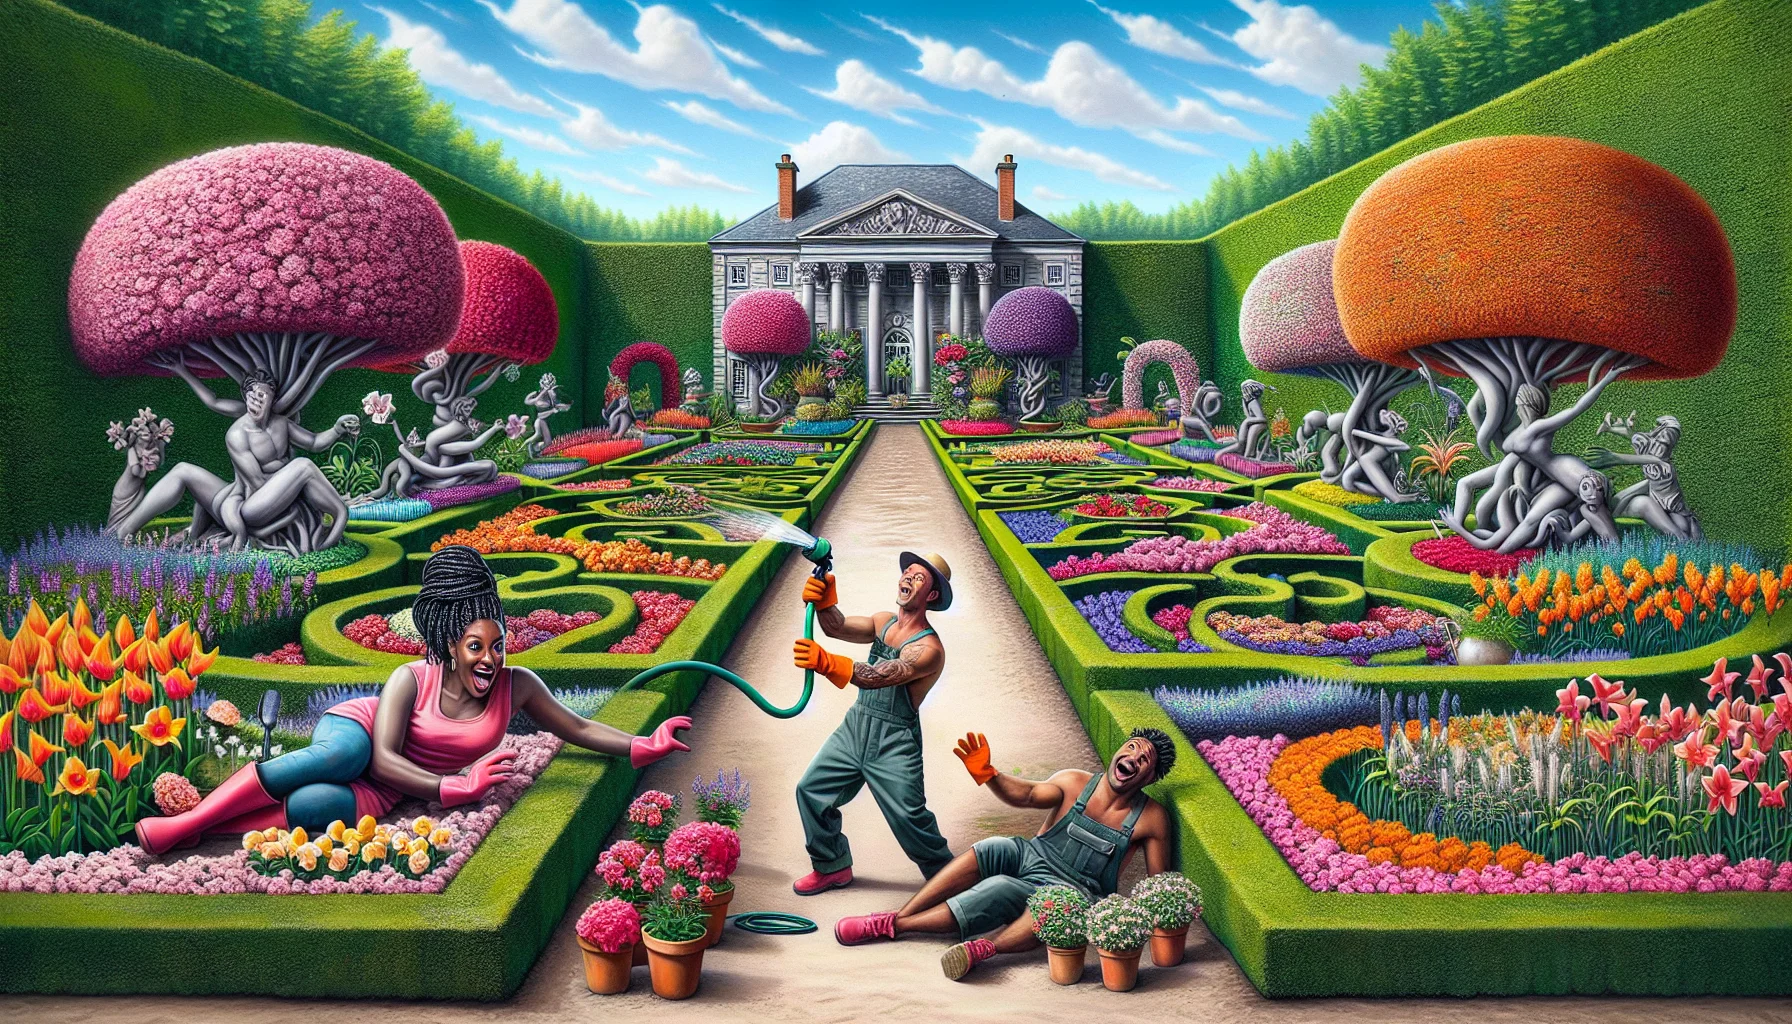 Create an image of a magnificently structured formal garden bursting with a symphony of colorful flowers, neatly trimmed hedges, and tasteful stone pathways. Place it in a humorous context to inspire interest in gardening. Include a snapshot scene of a male Caucasian gardener, wearing a hat and gloves, accidentally turning on a garden hose and getting soaked. Also, depict a black female gardener with braided hair, painted with a surprised expression, laughing as she misplants a flower ridiculously oversized for its pot. The scene should encourage a sense of whimsy and playfulness, showing that gardening also has its fair share of amusing moments.